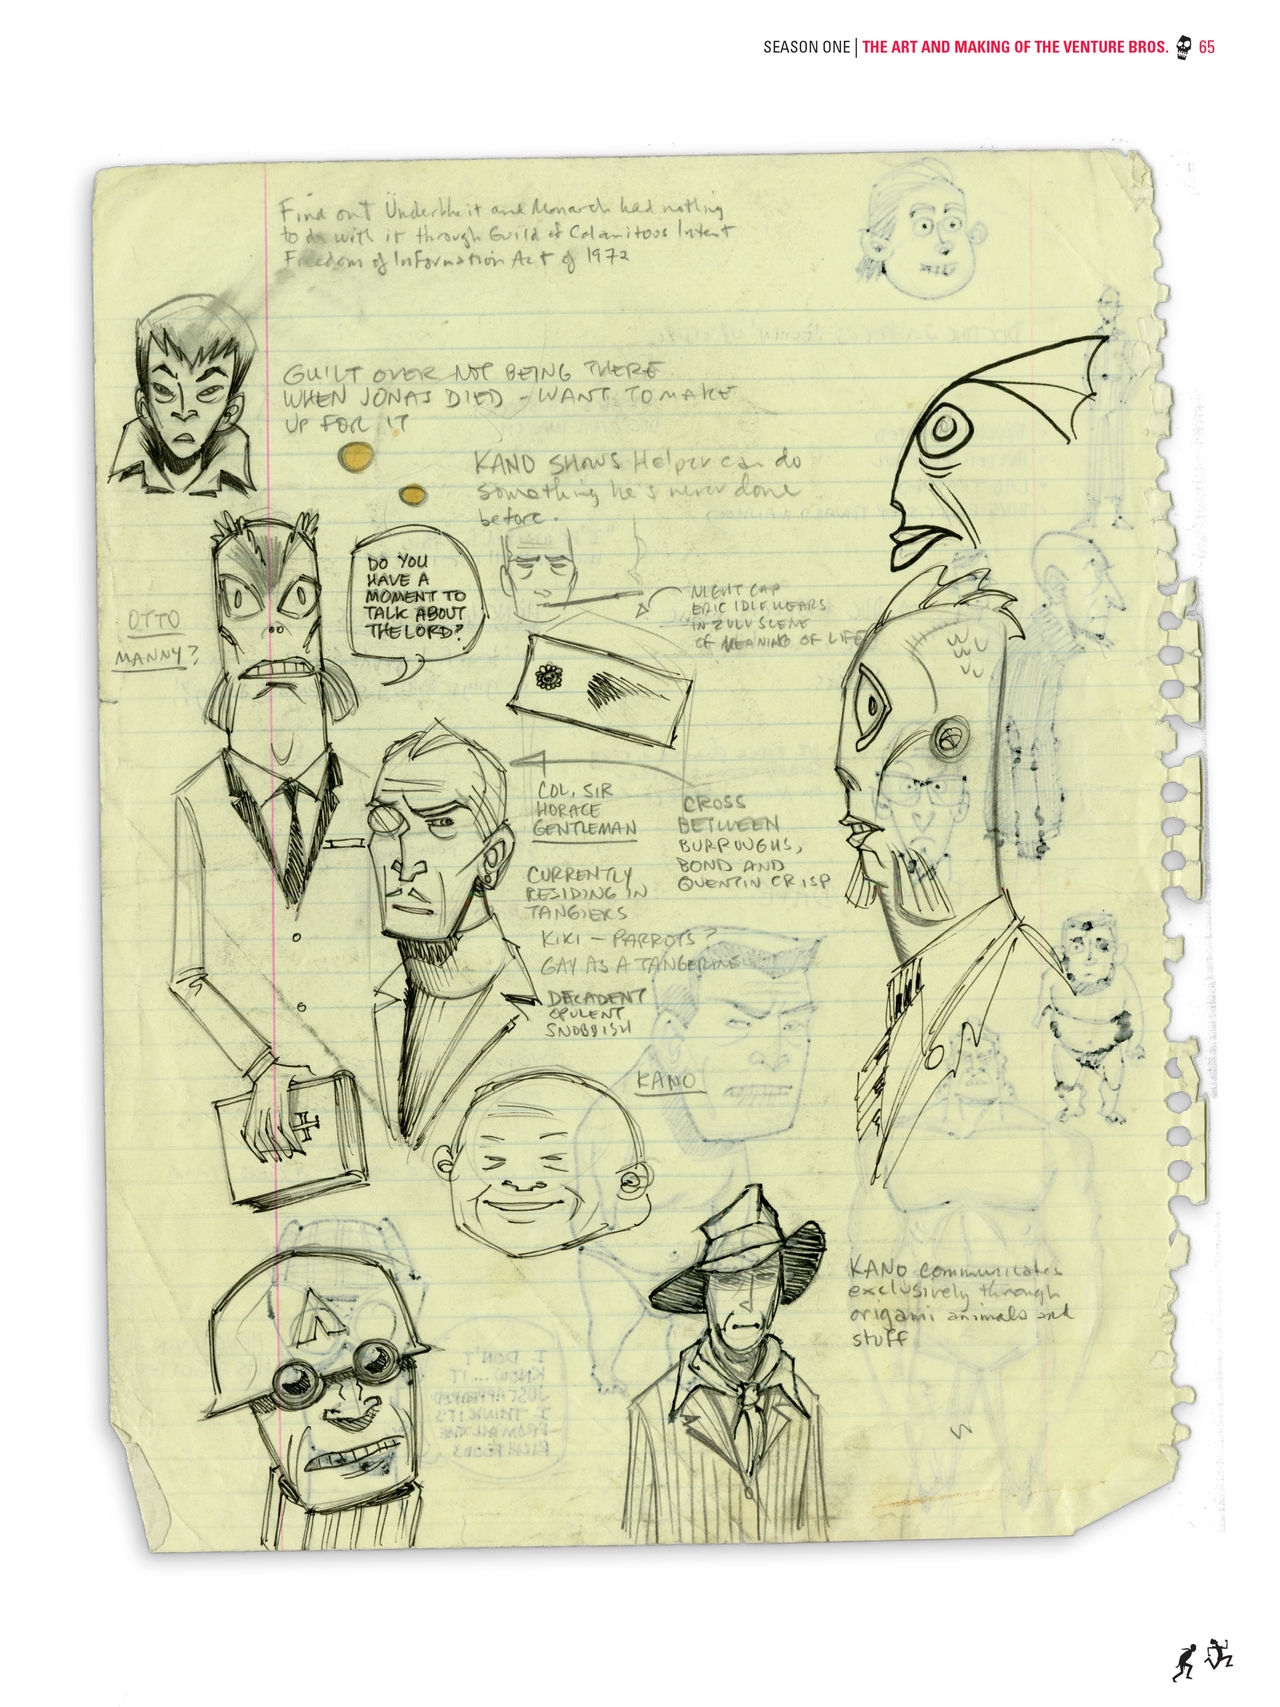 Go Team Venture! - The Art and Making of the Venture Bros 64